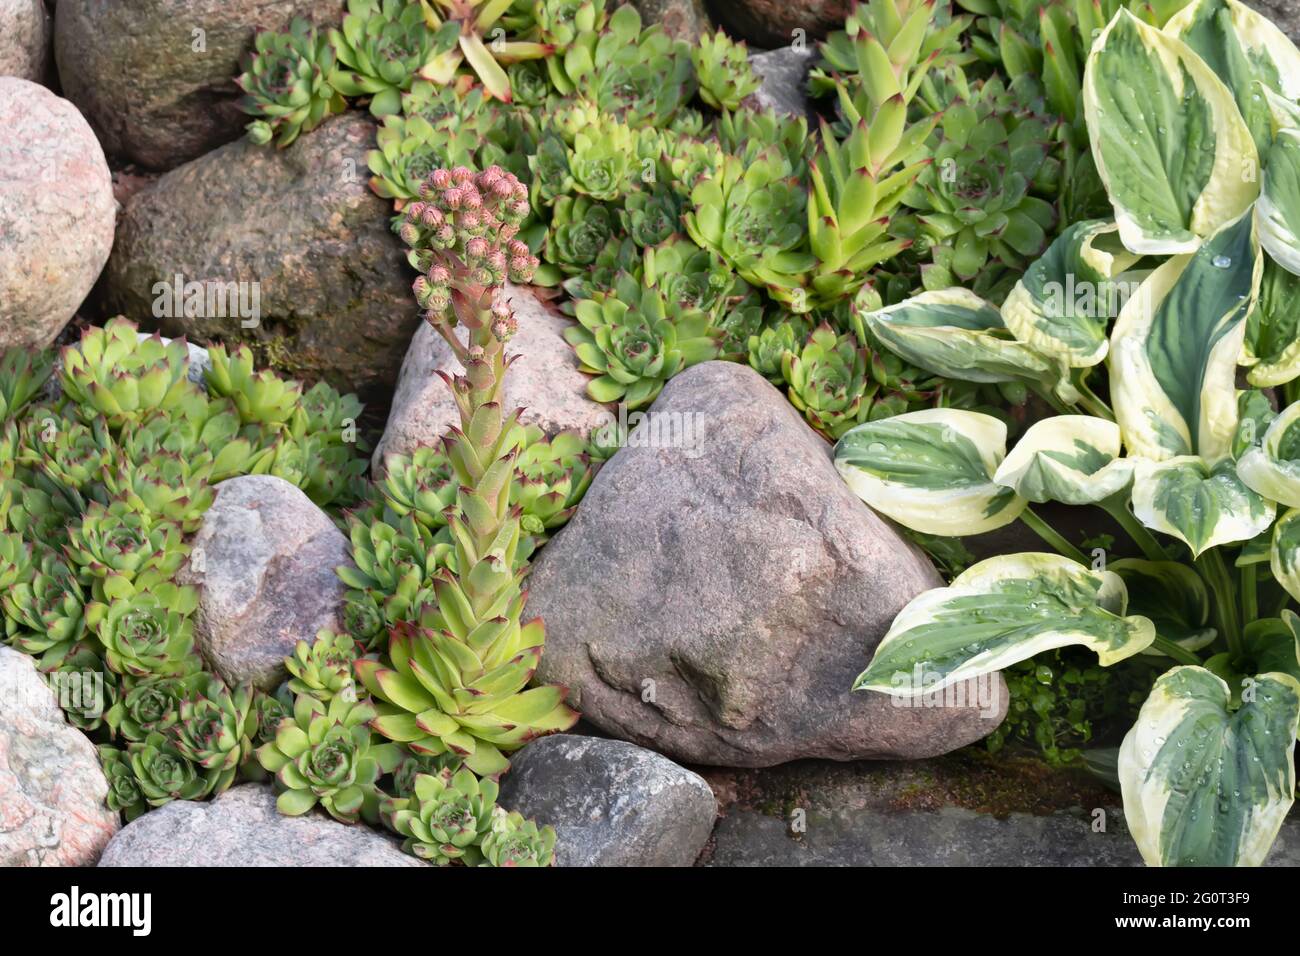 Blooming evergreen groundcover plant Sempervivum known as Houseleek in rockery Stock Photo